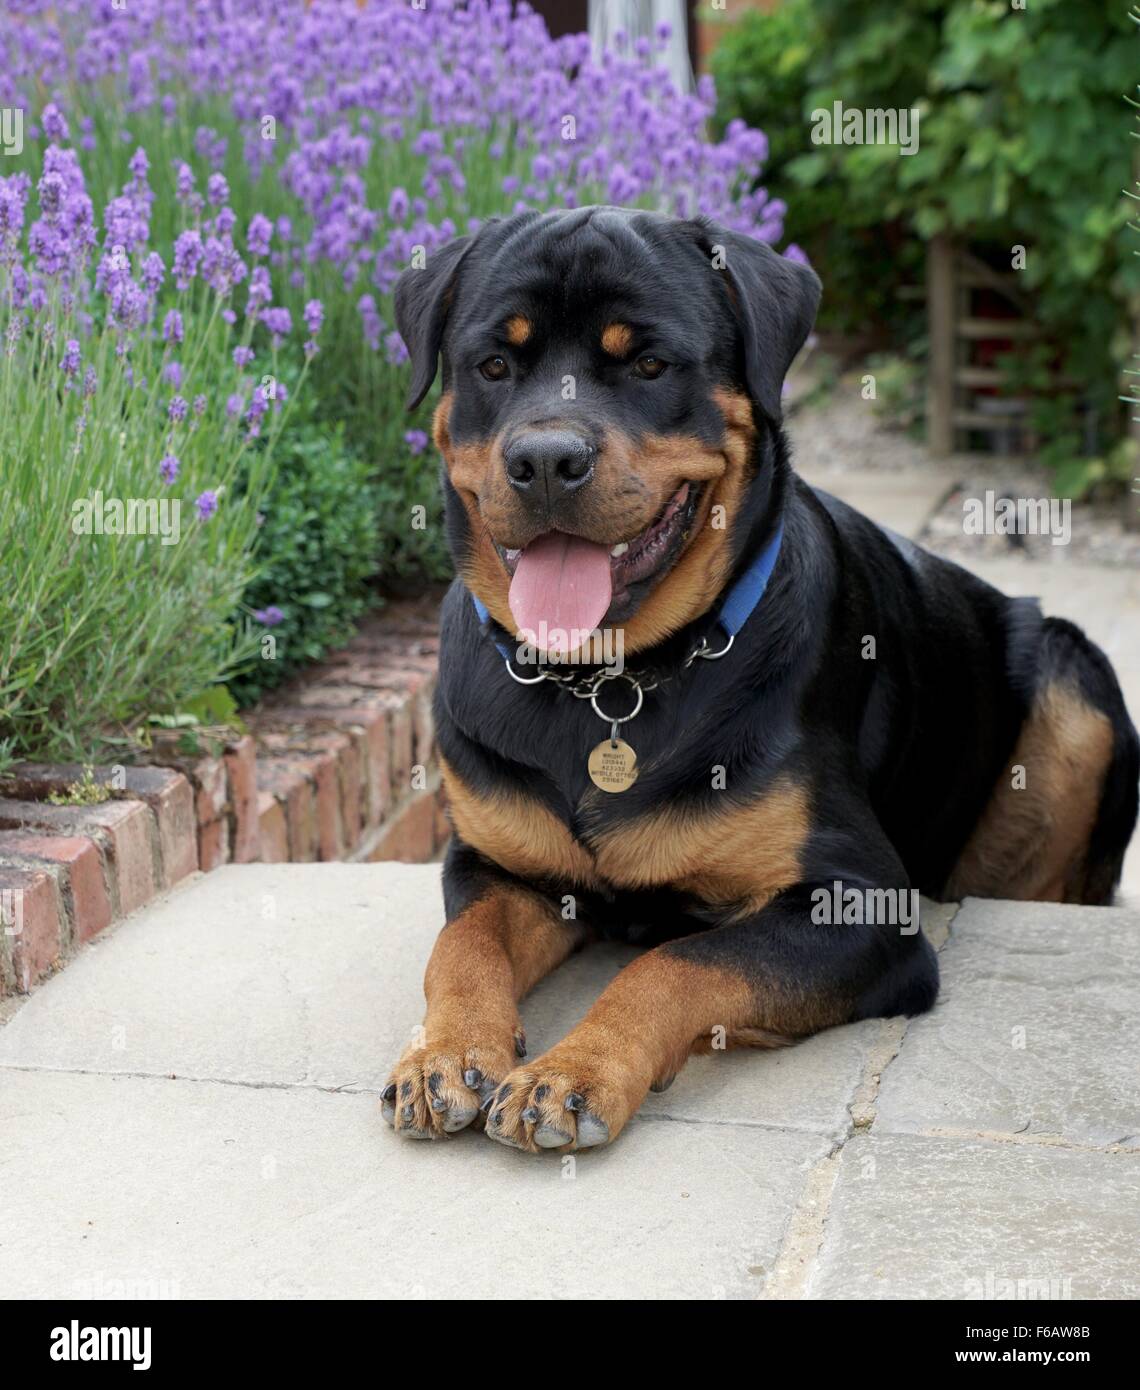 Rottweiler sitting by Lavender Stock Photo